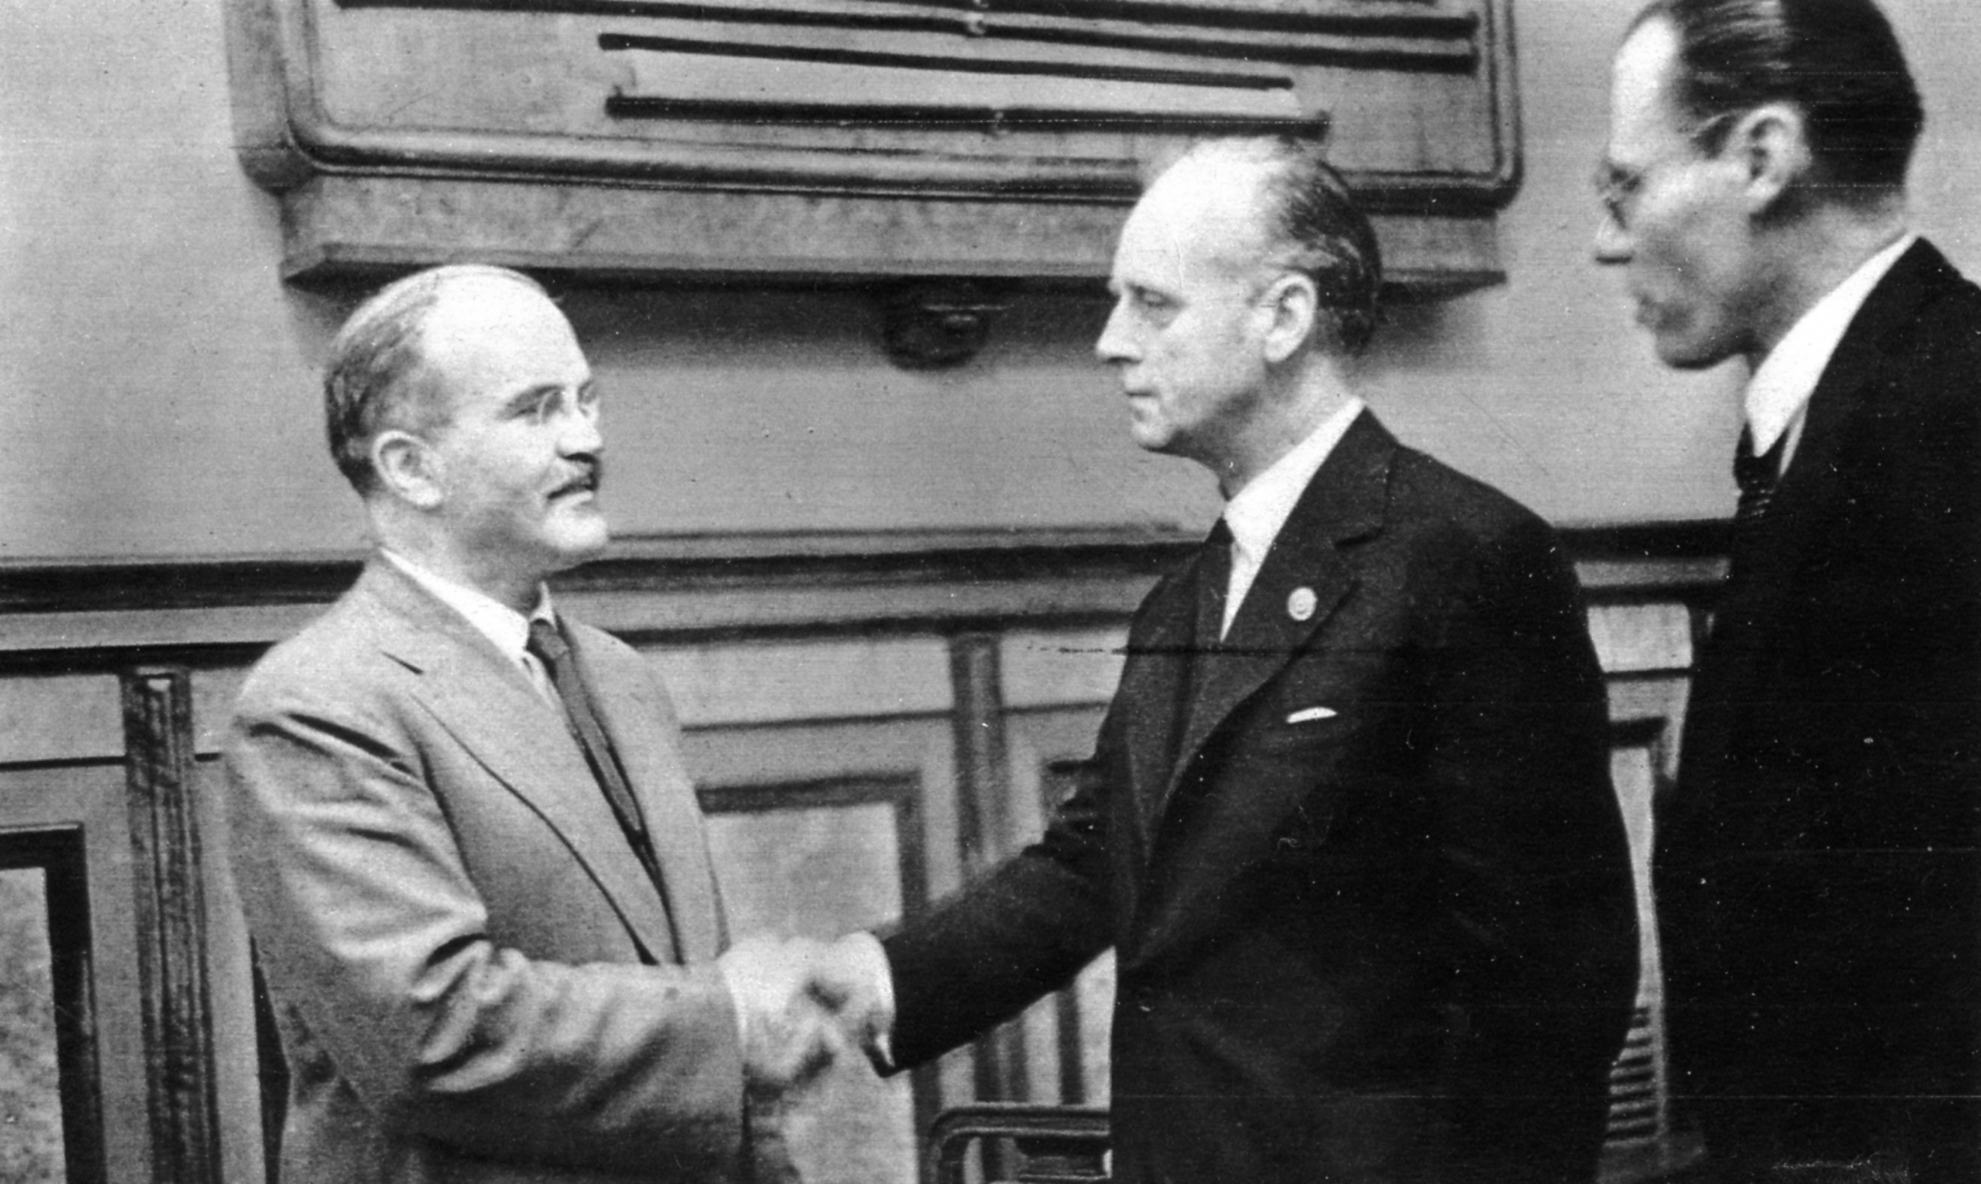 Vyacheslav Molotov and Joachim von Ribbentrop shaking hands, Moscow, Russia, 28 Sep 1939